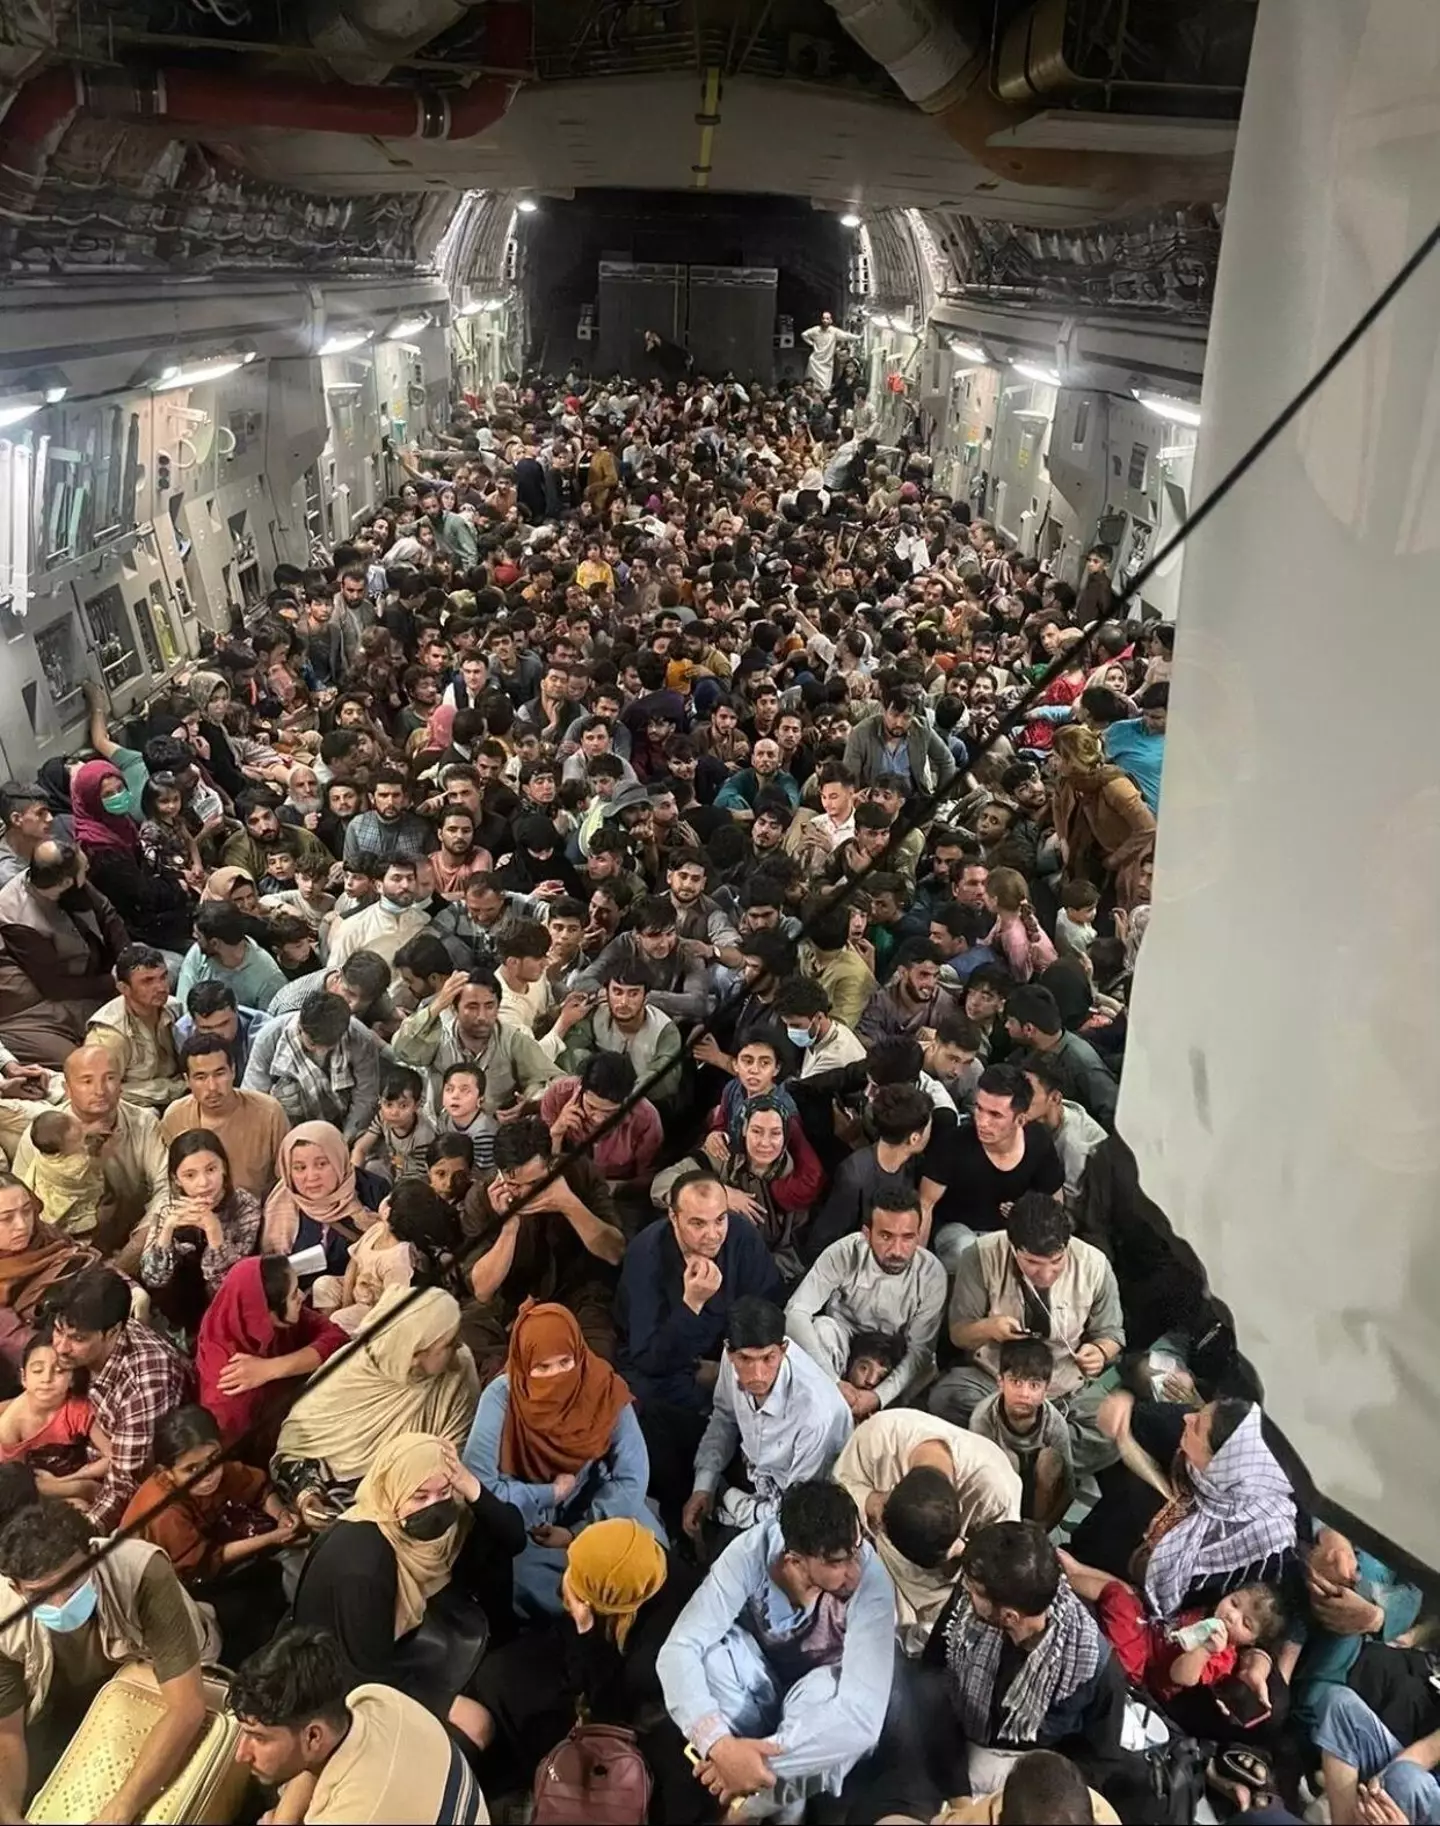 A U.S. Air Force C-17 Globemaster III safely transported approximately 640 Afghan citizens from Hamid Karzai International after the Taliban swept into power once more.